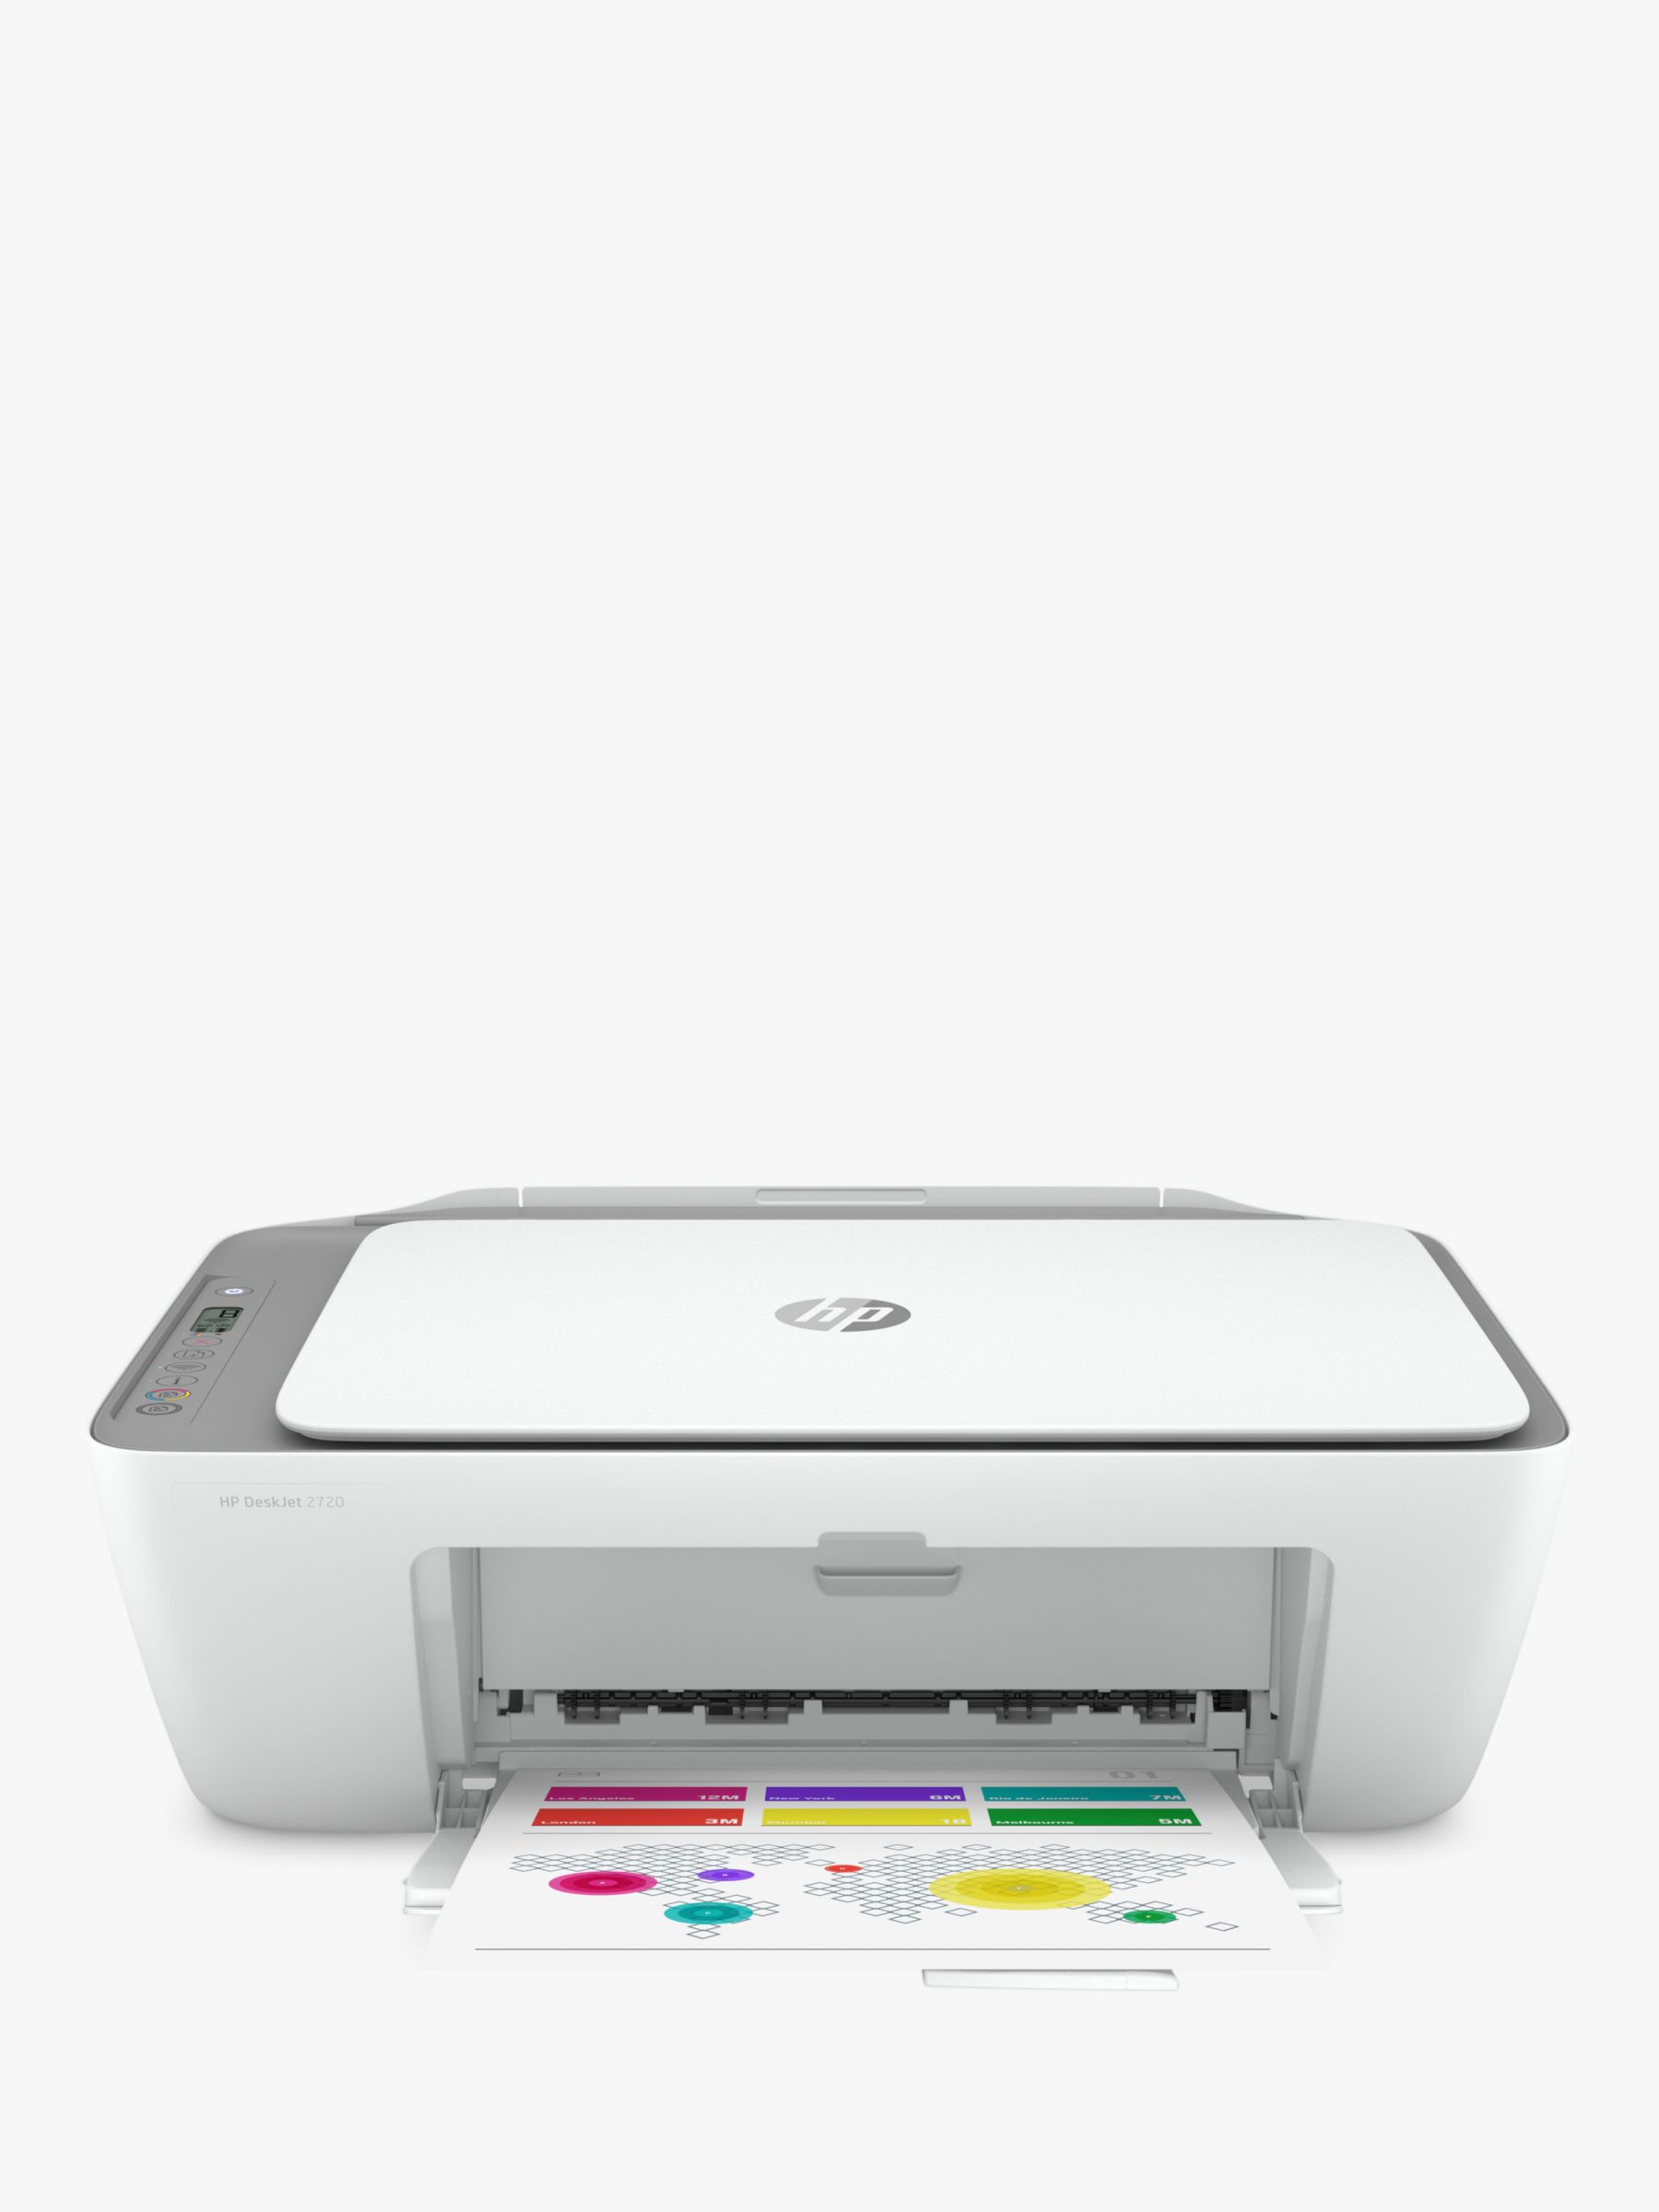 Hp Deskjet 2720 All In One Wireless Printer Hp Instant Ink Compatible With 2 Months Trial White Grey At John Lewis Partners